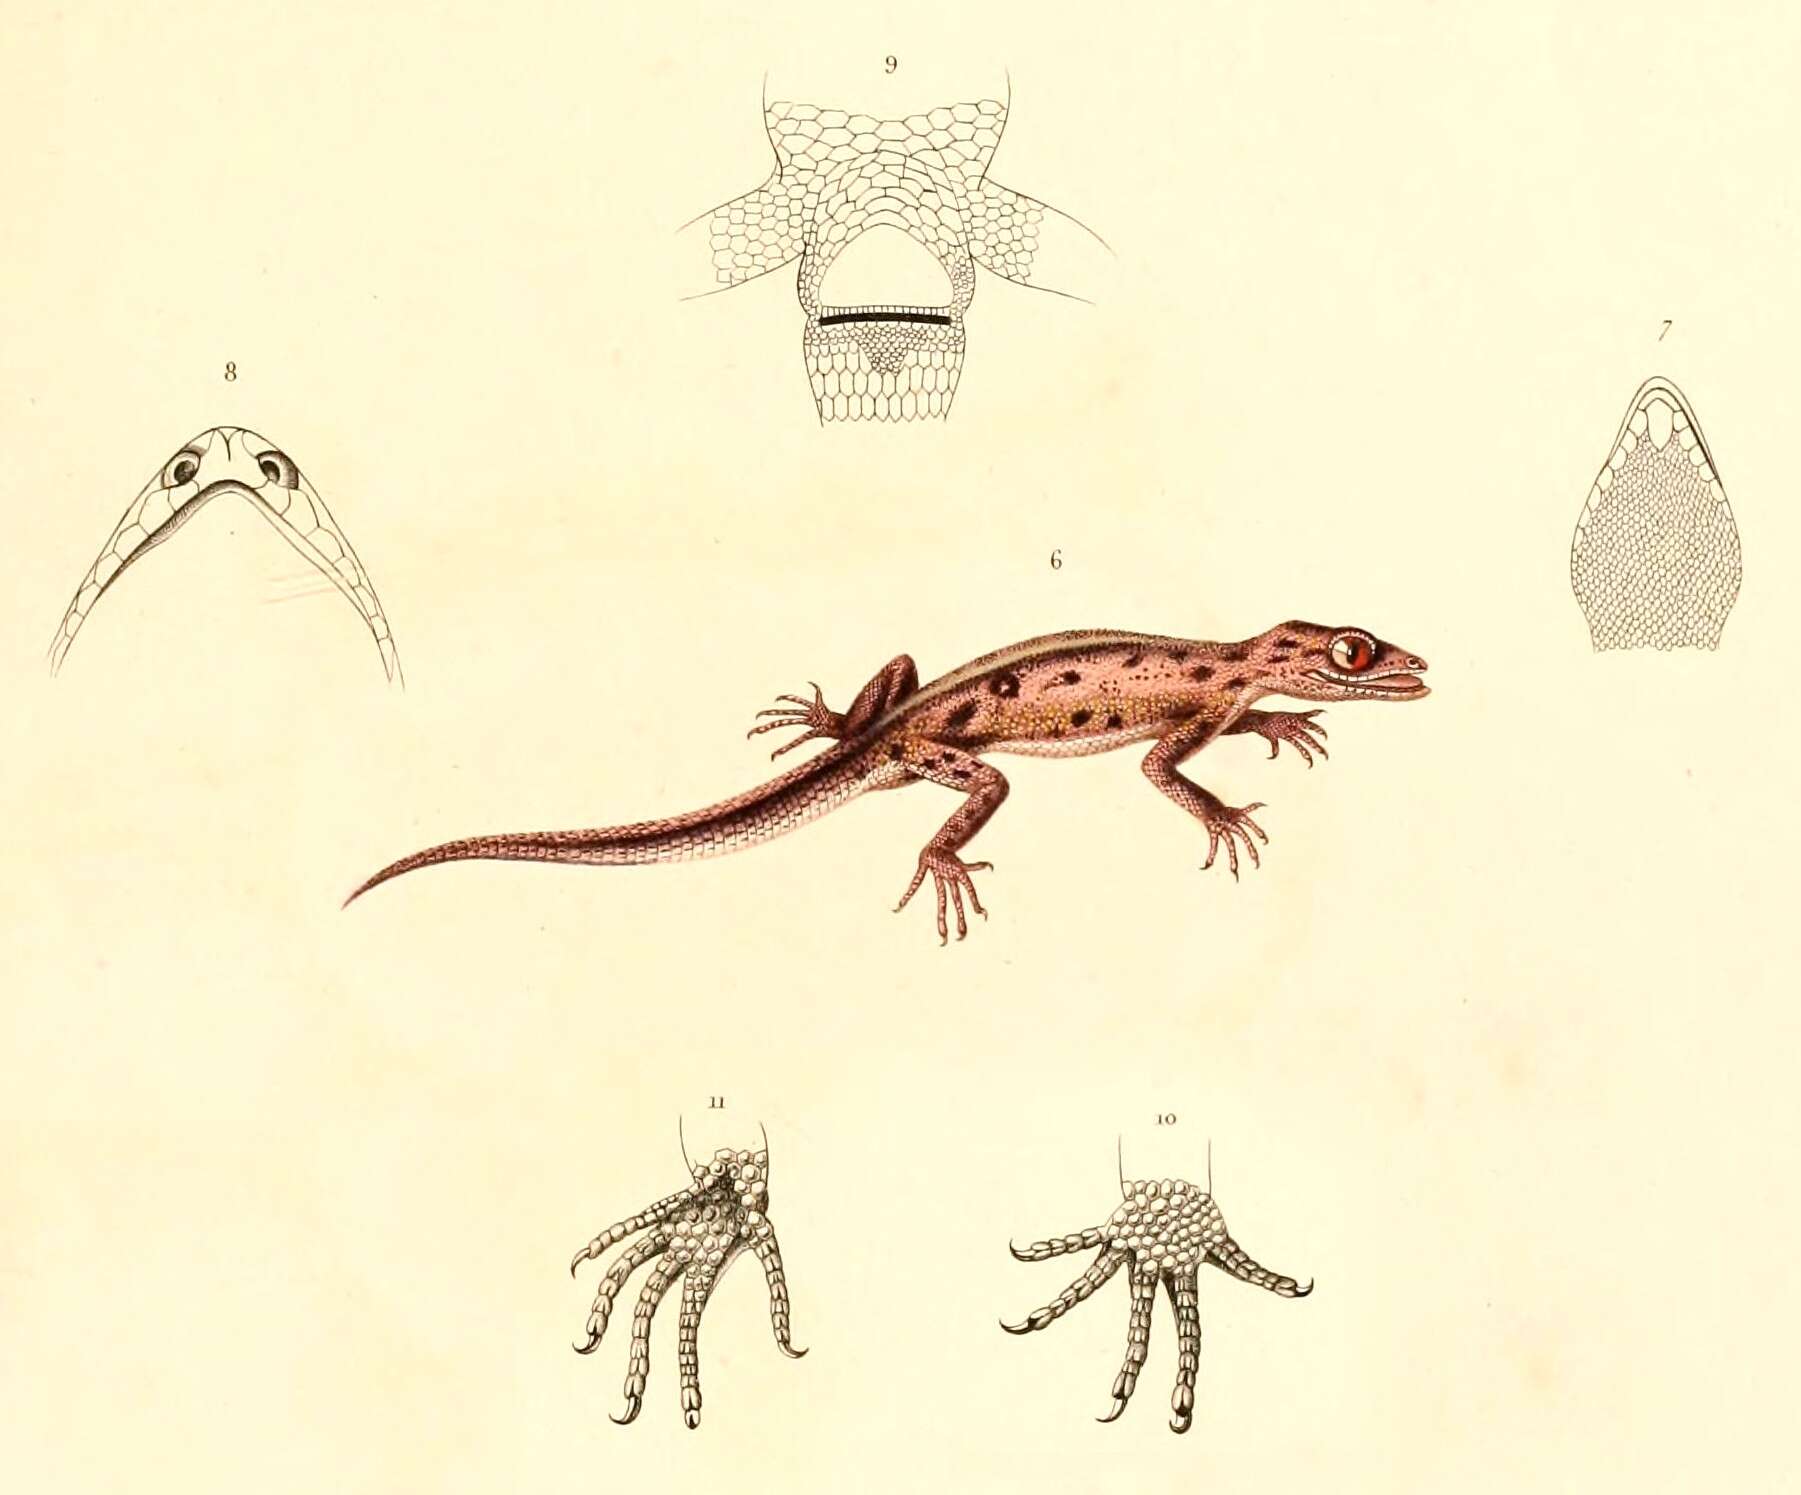 Image of South American Leaf-toed Gecko